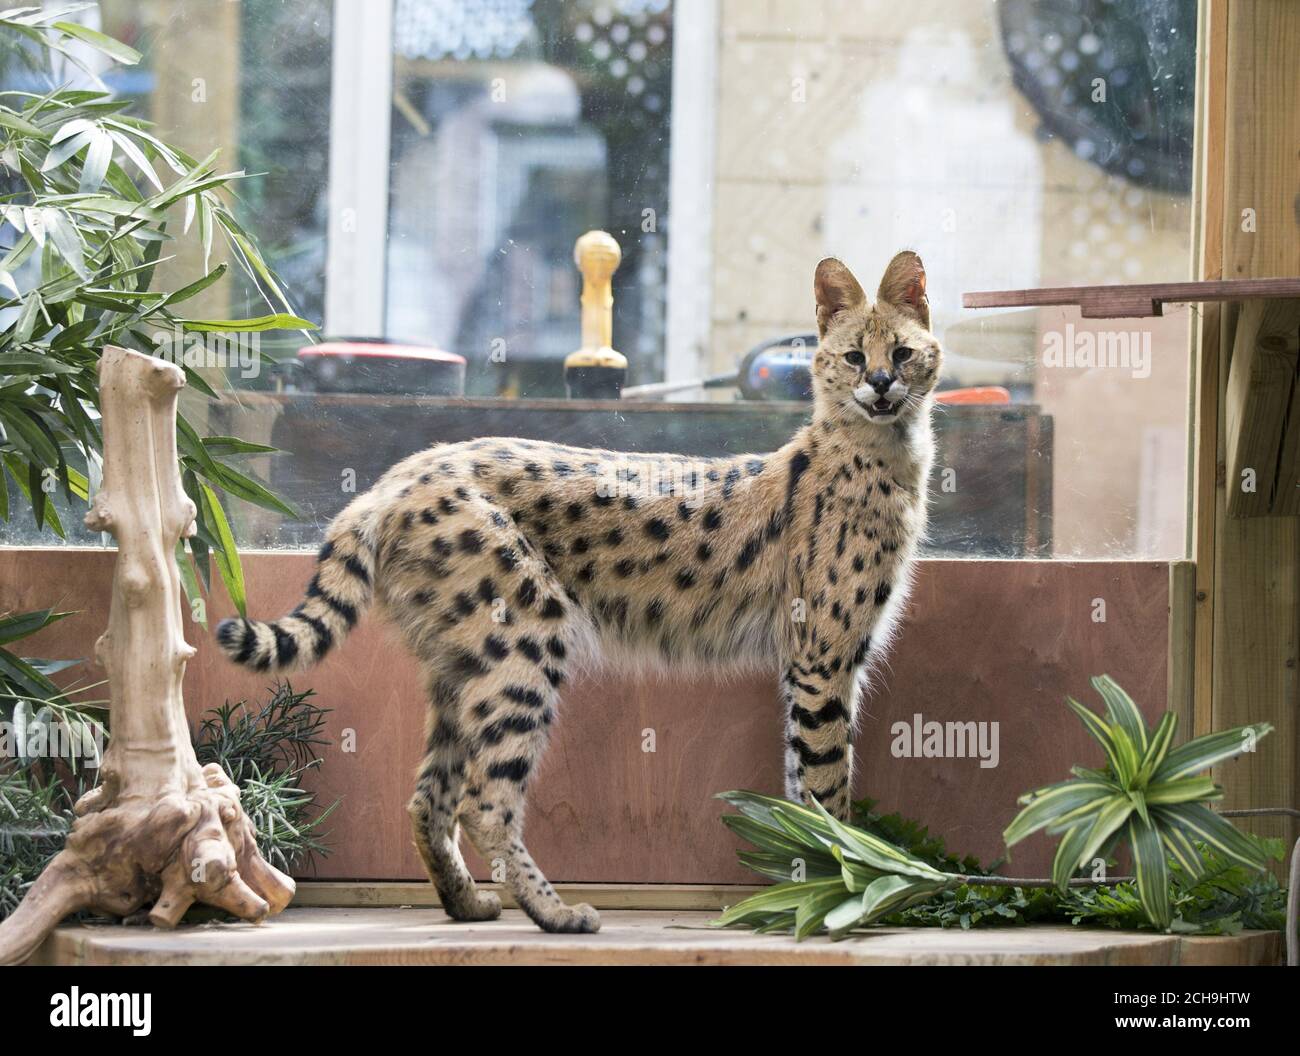 EMBARGOED TO 0001 MONDAY MAY 23 Serval cat Squeaks, aged 1 1/2, at his home in Great Wakering, Essex, as lions, wolves and deadly venomous snakes are among thousands of dangerous animals being kept on private properties across the UK, figures have revealed. Stock Photo